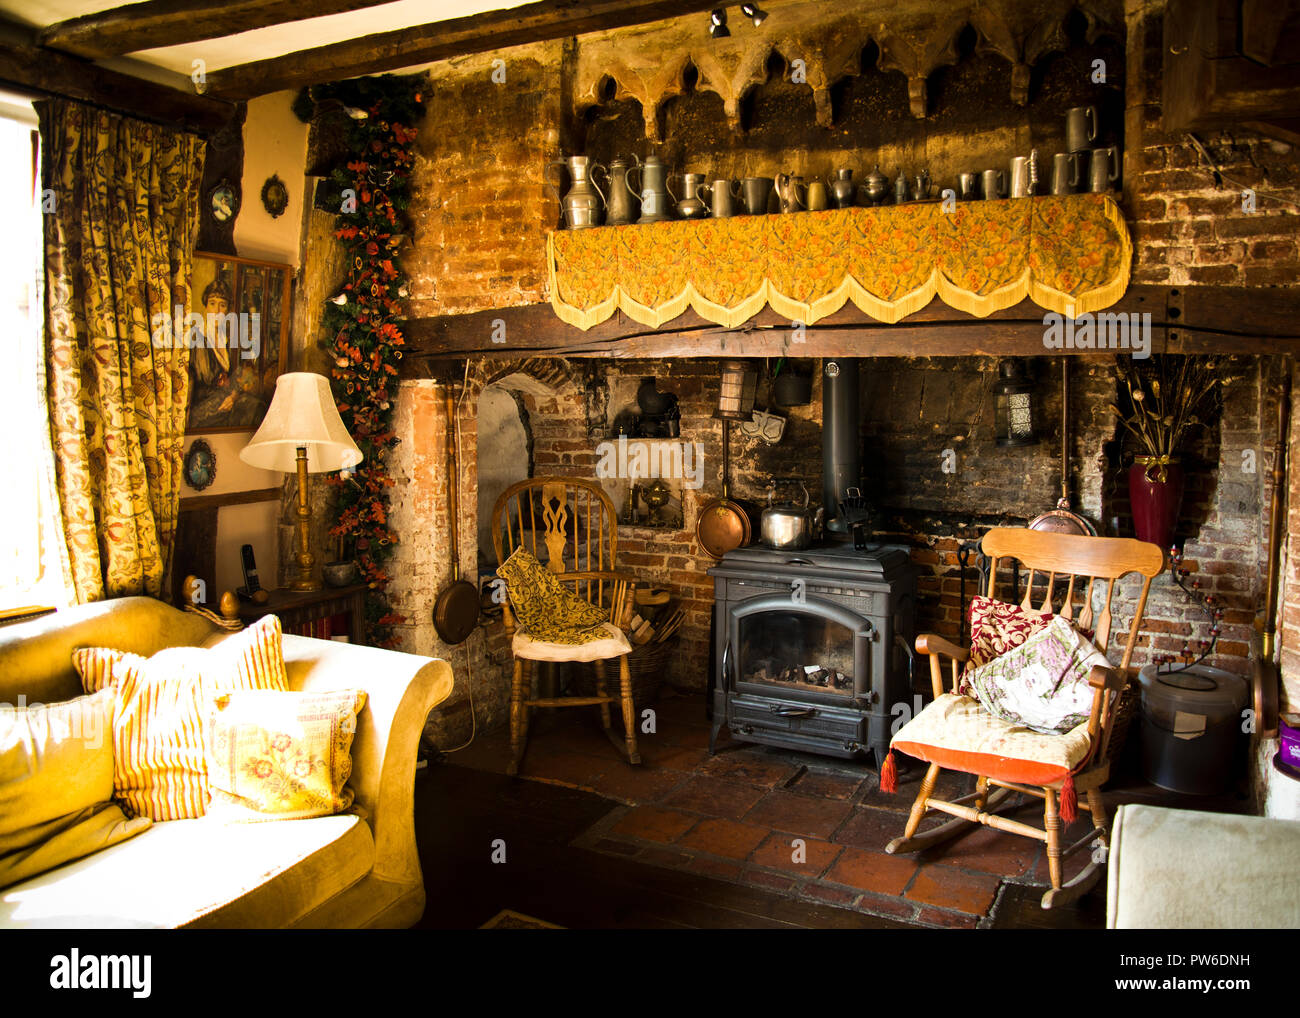 Old fireplace in the drawing room of an old country village house surrounded with decorative antique furniture and interesting objects hanging on wall Stock Photo